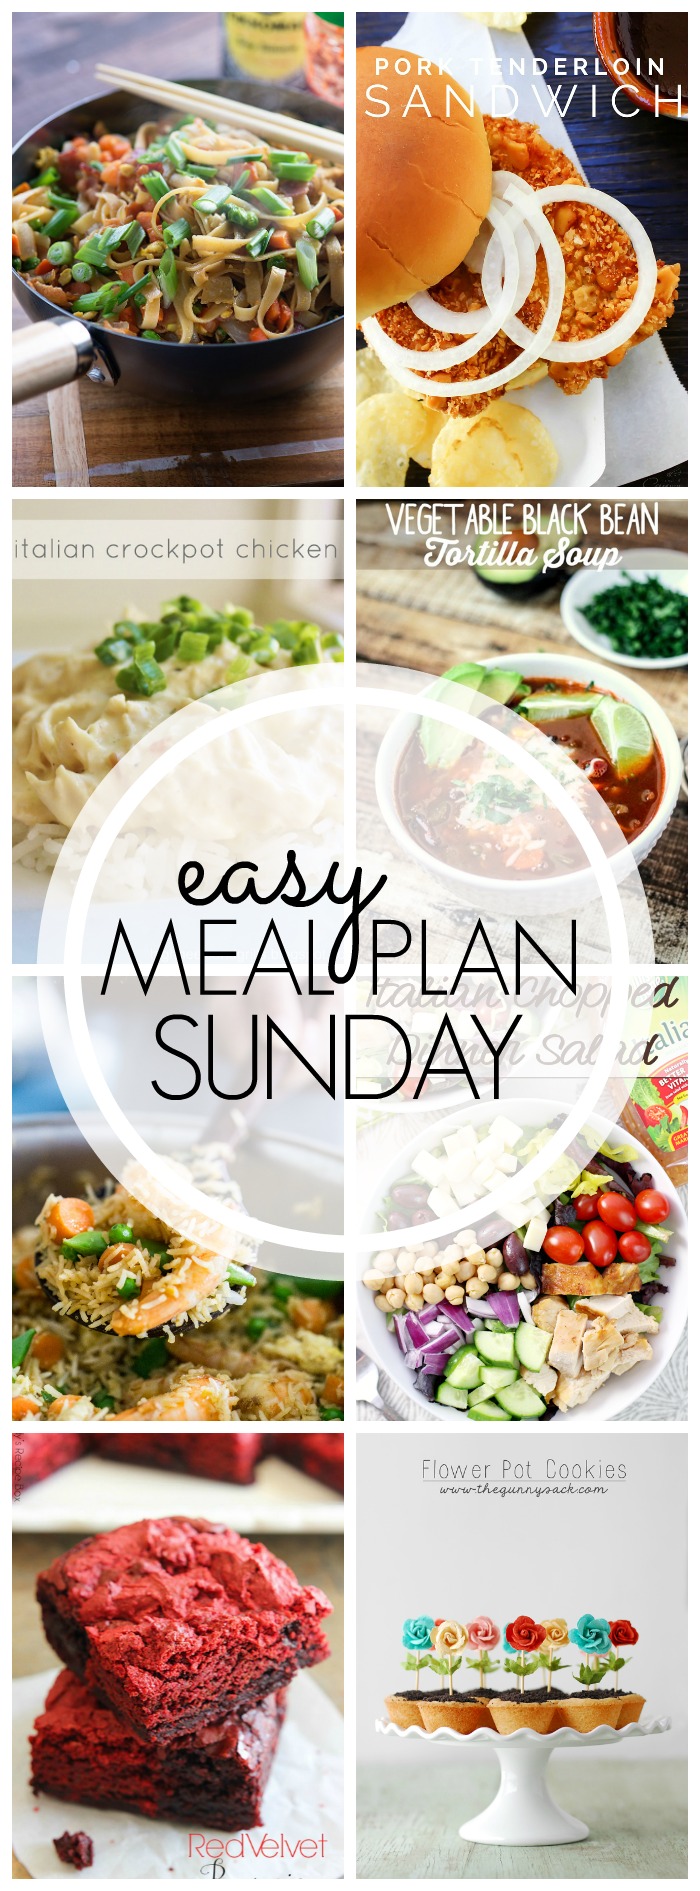 Easy Meal Plan Sunday #42